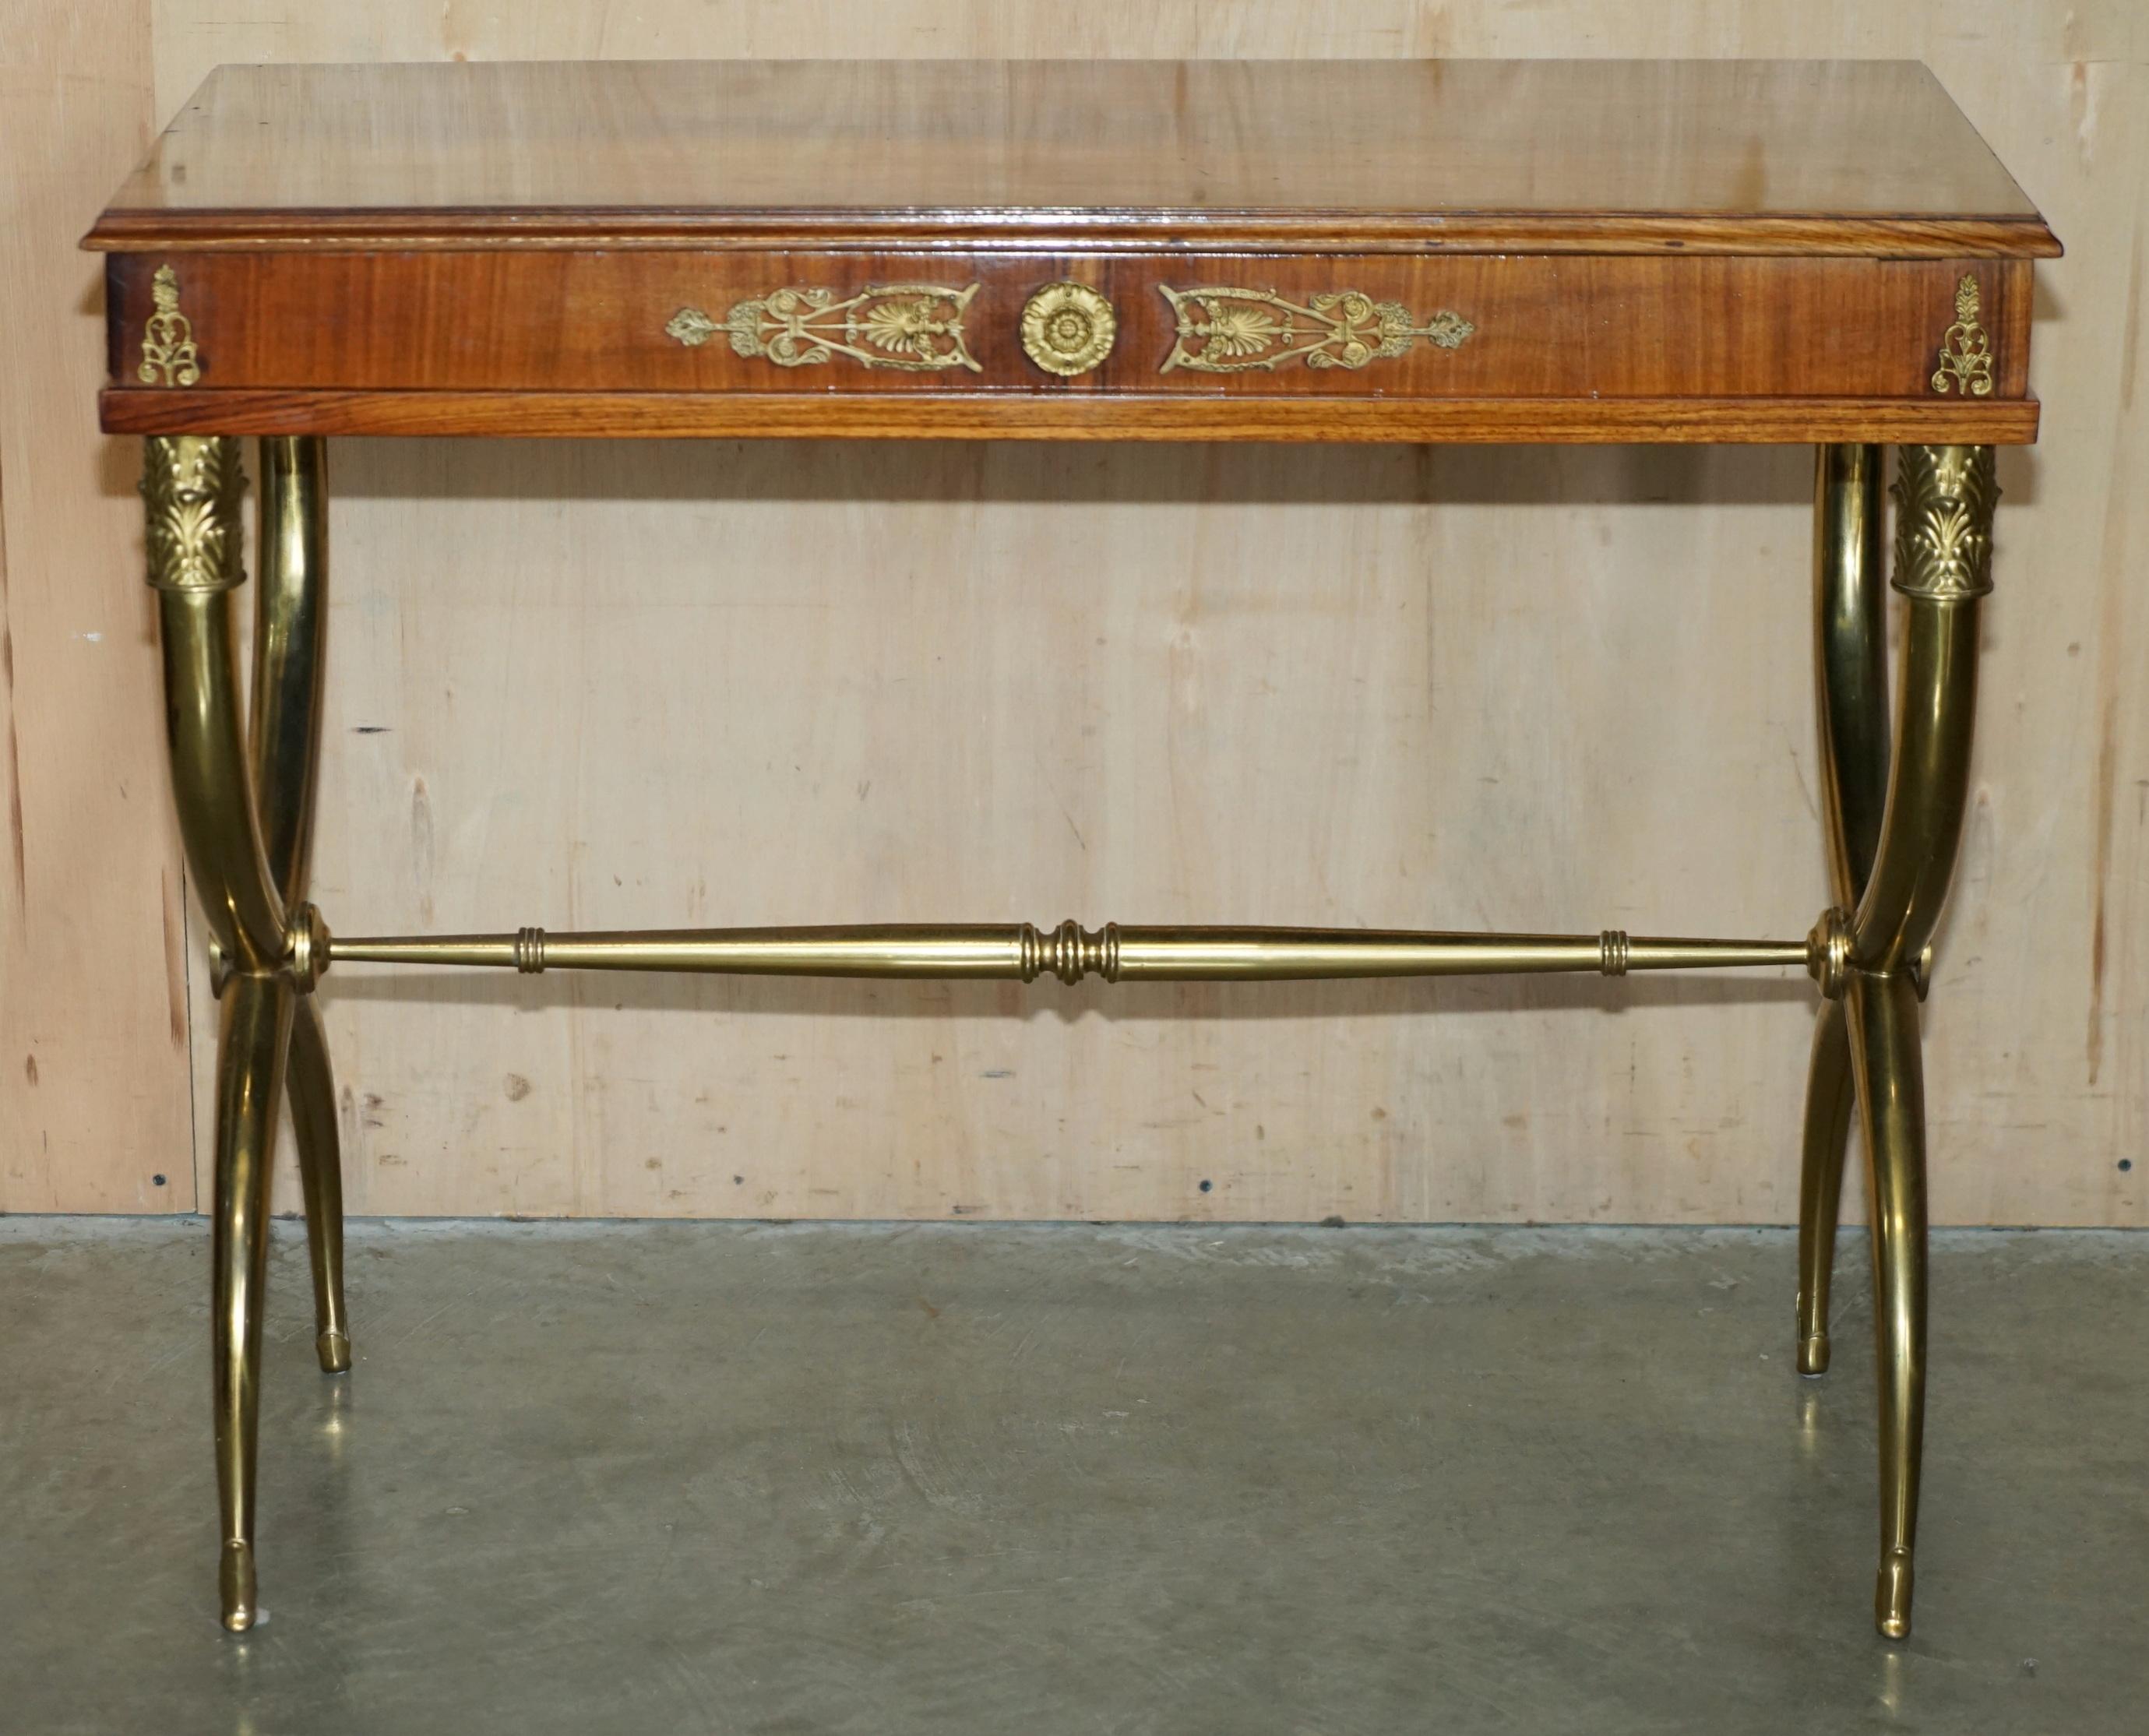 STUNNING REGENCY STYLE NEOCLASSICAL BRASS & WALNUT WRiTING TABLE DESK CIRCA 1920 For Sale 12